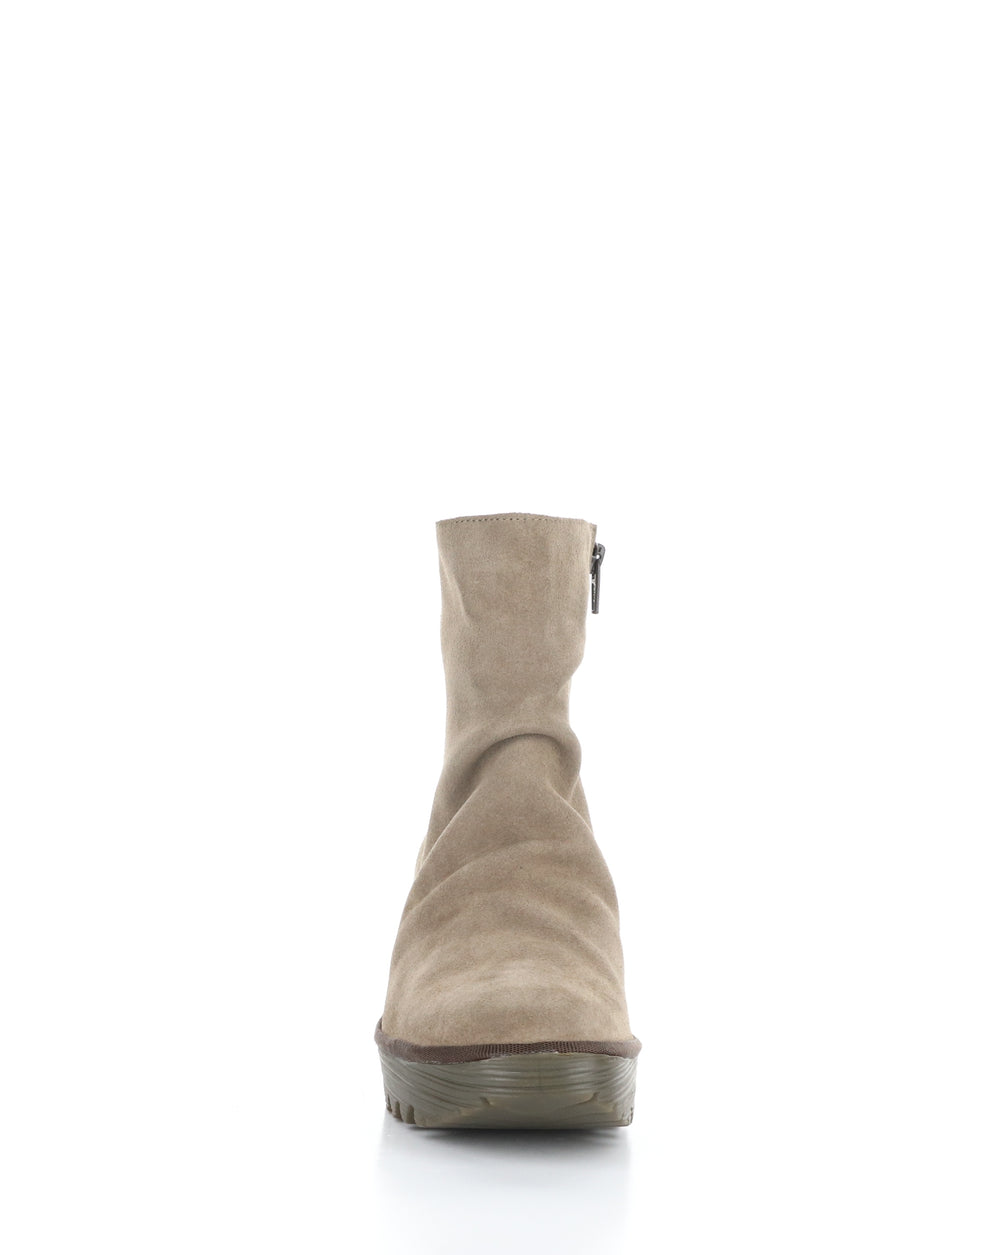 YOPA461FLY 003 TAUPE/EXPRESSO Round Toe Boots